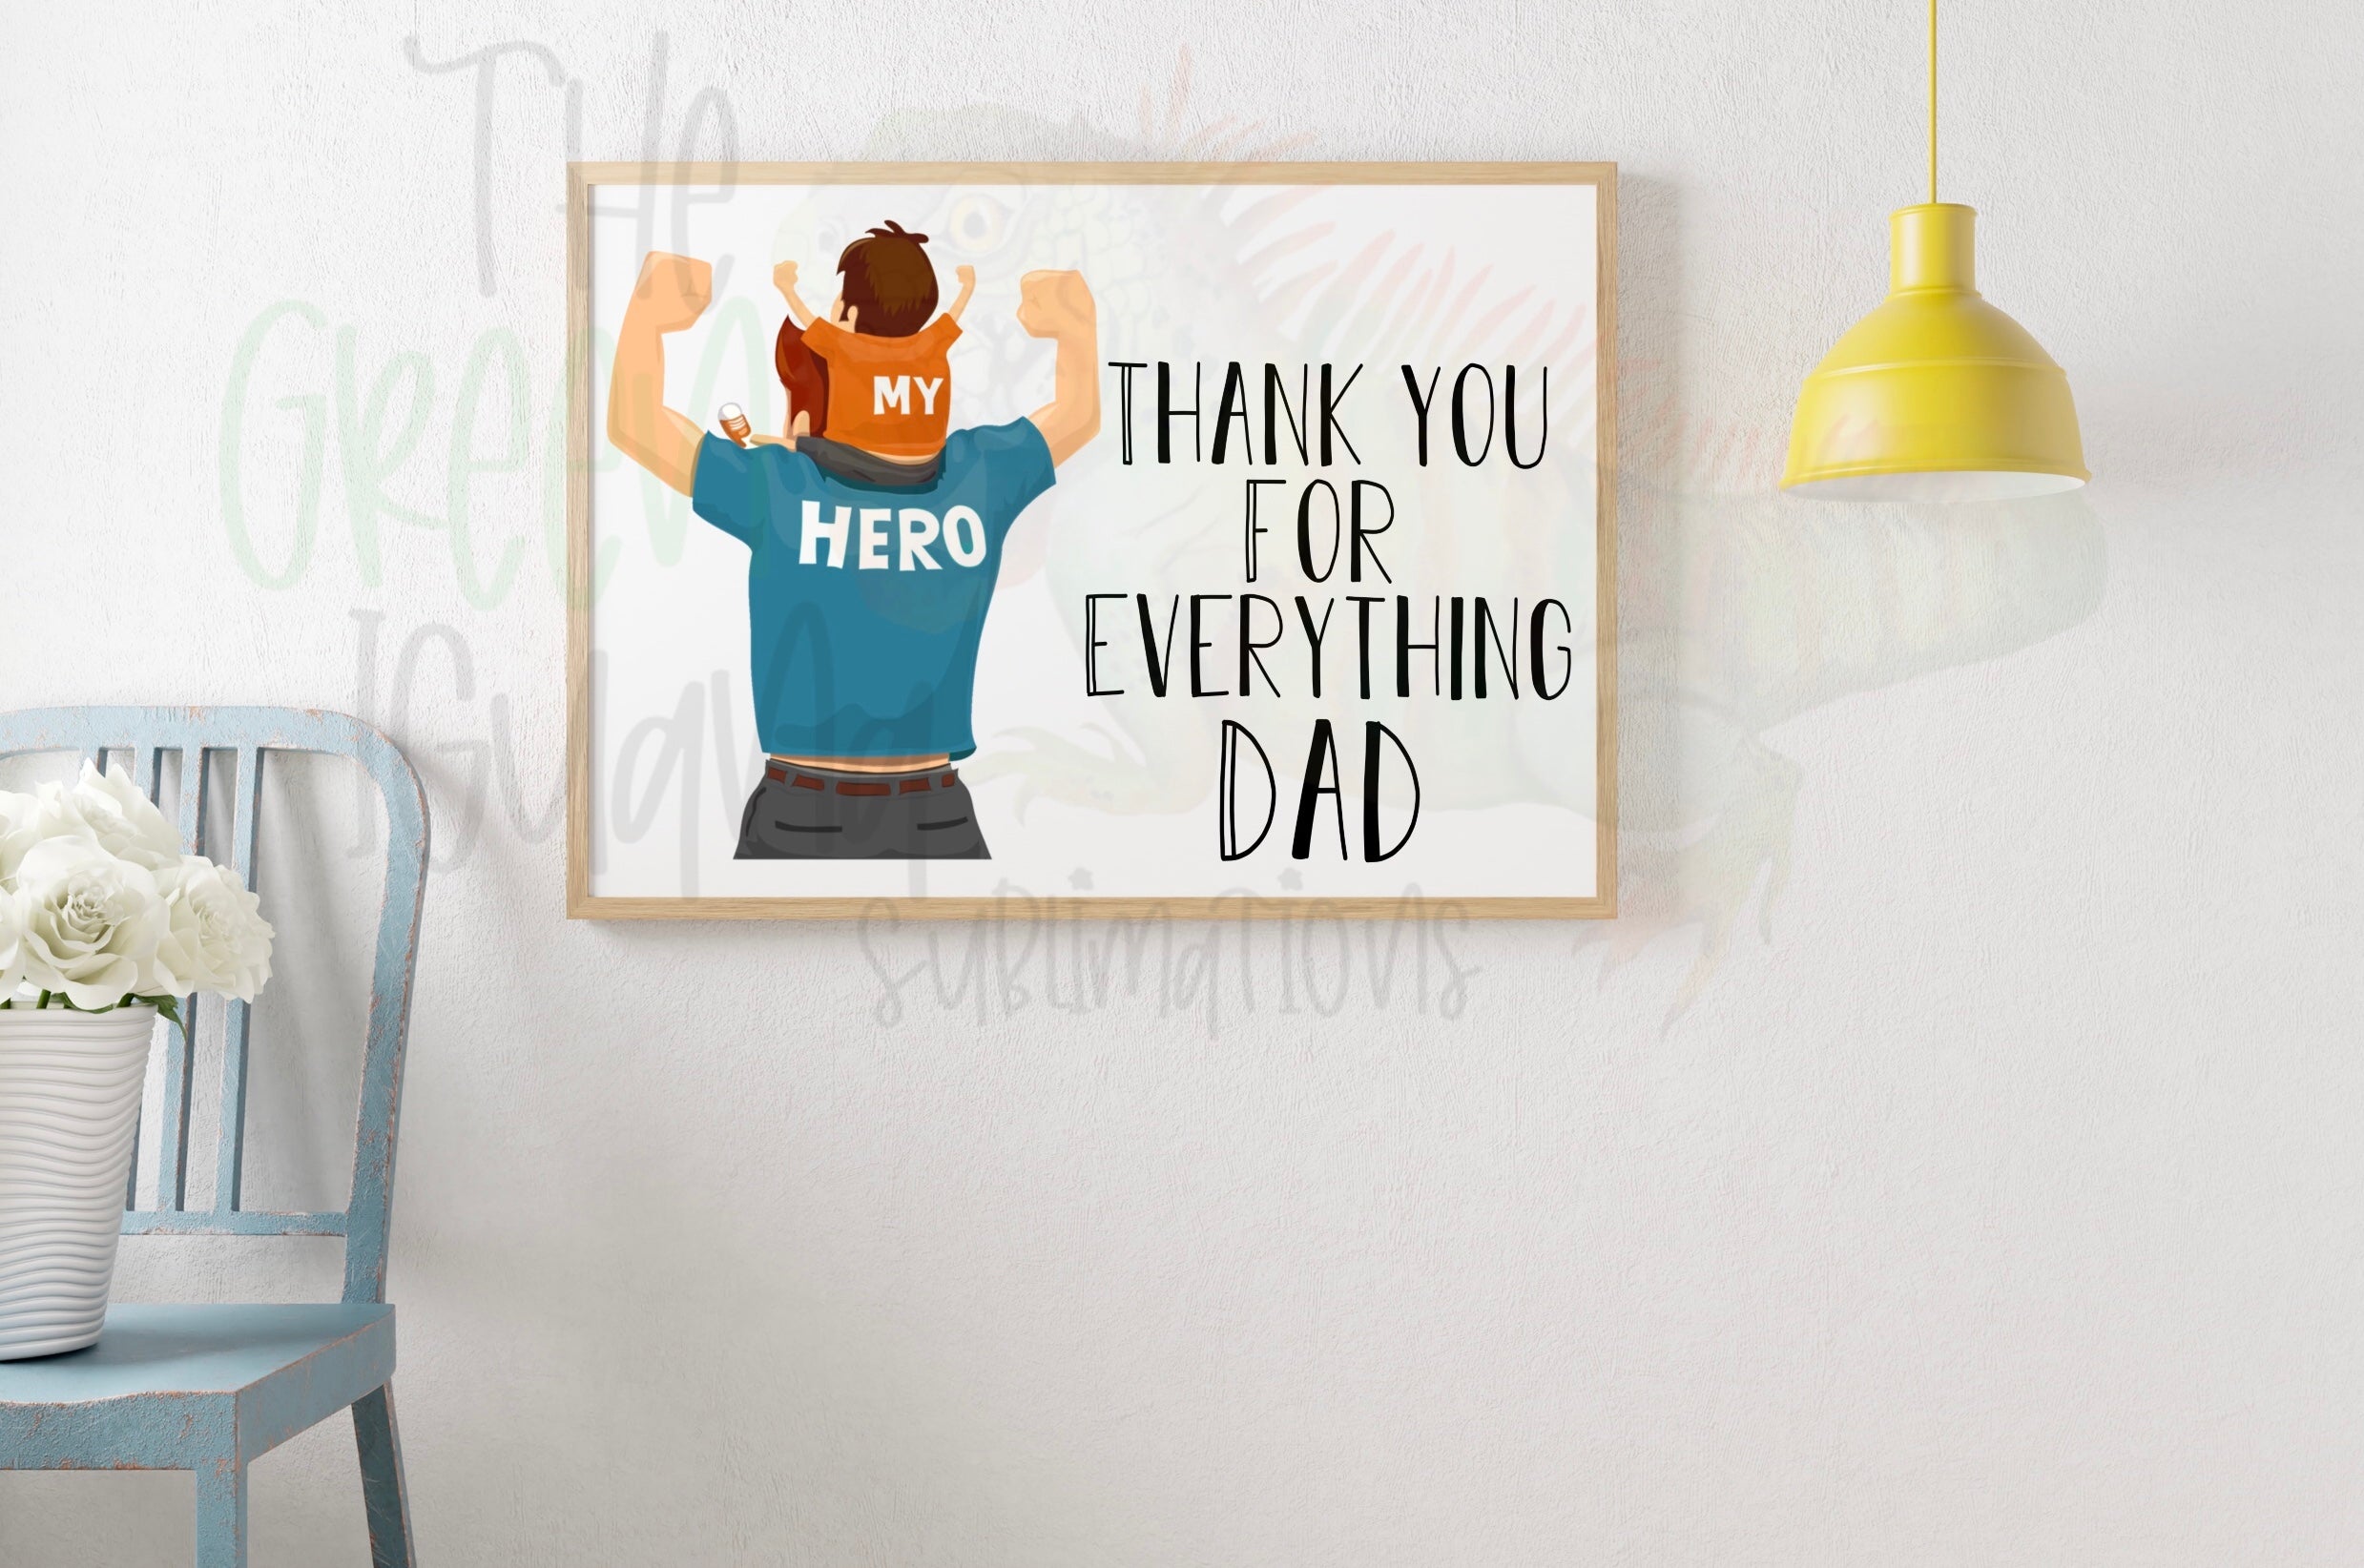 Thank you for everything dad - DIGITAL